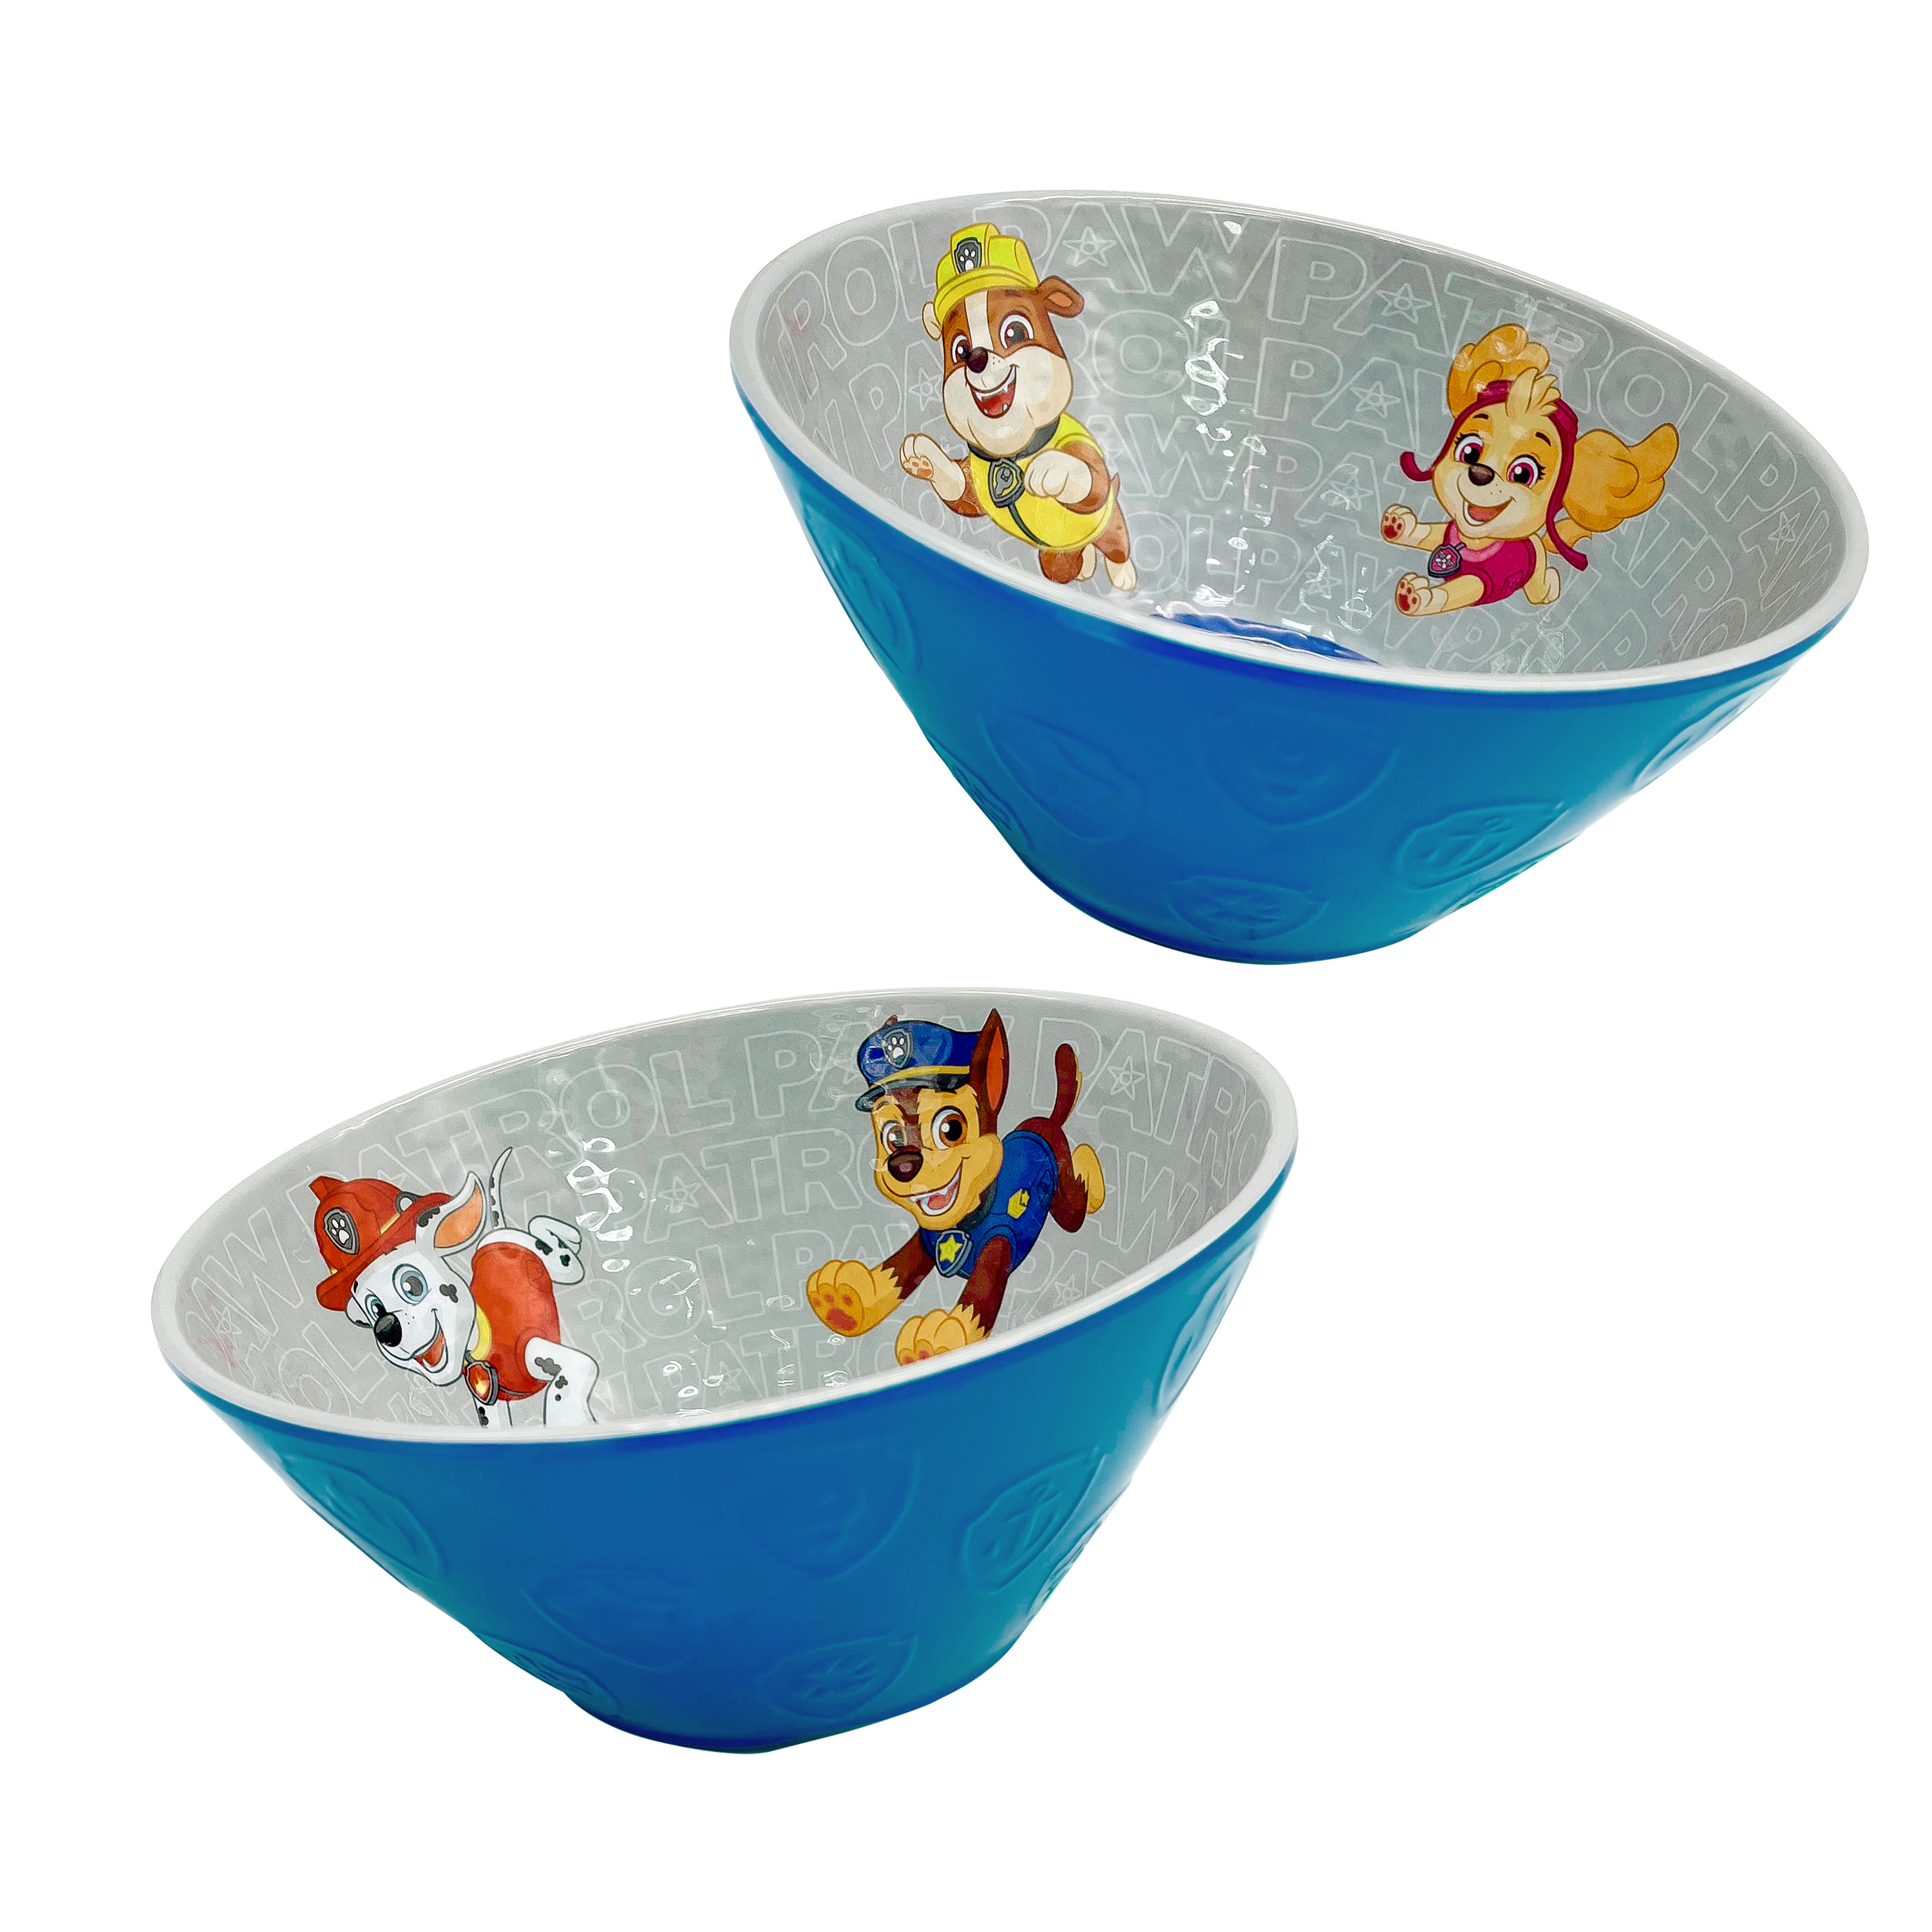 Paw patrol Kids 9-inch Plate and 6-inch Bowl Set, Chase, Skye and Friends, 2-piece set slideshow image 5